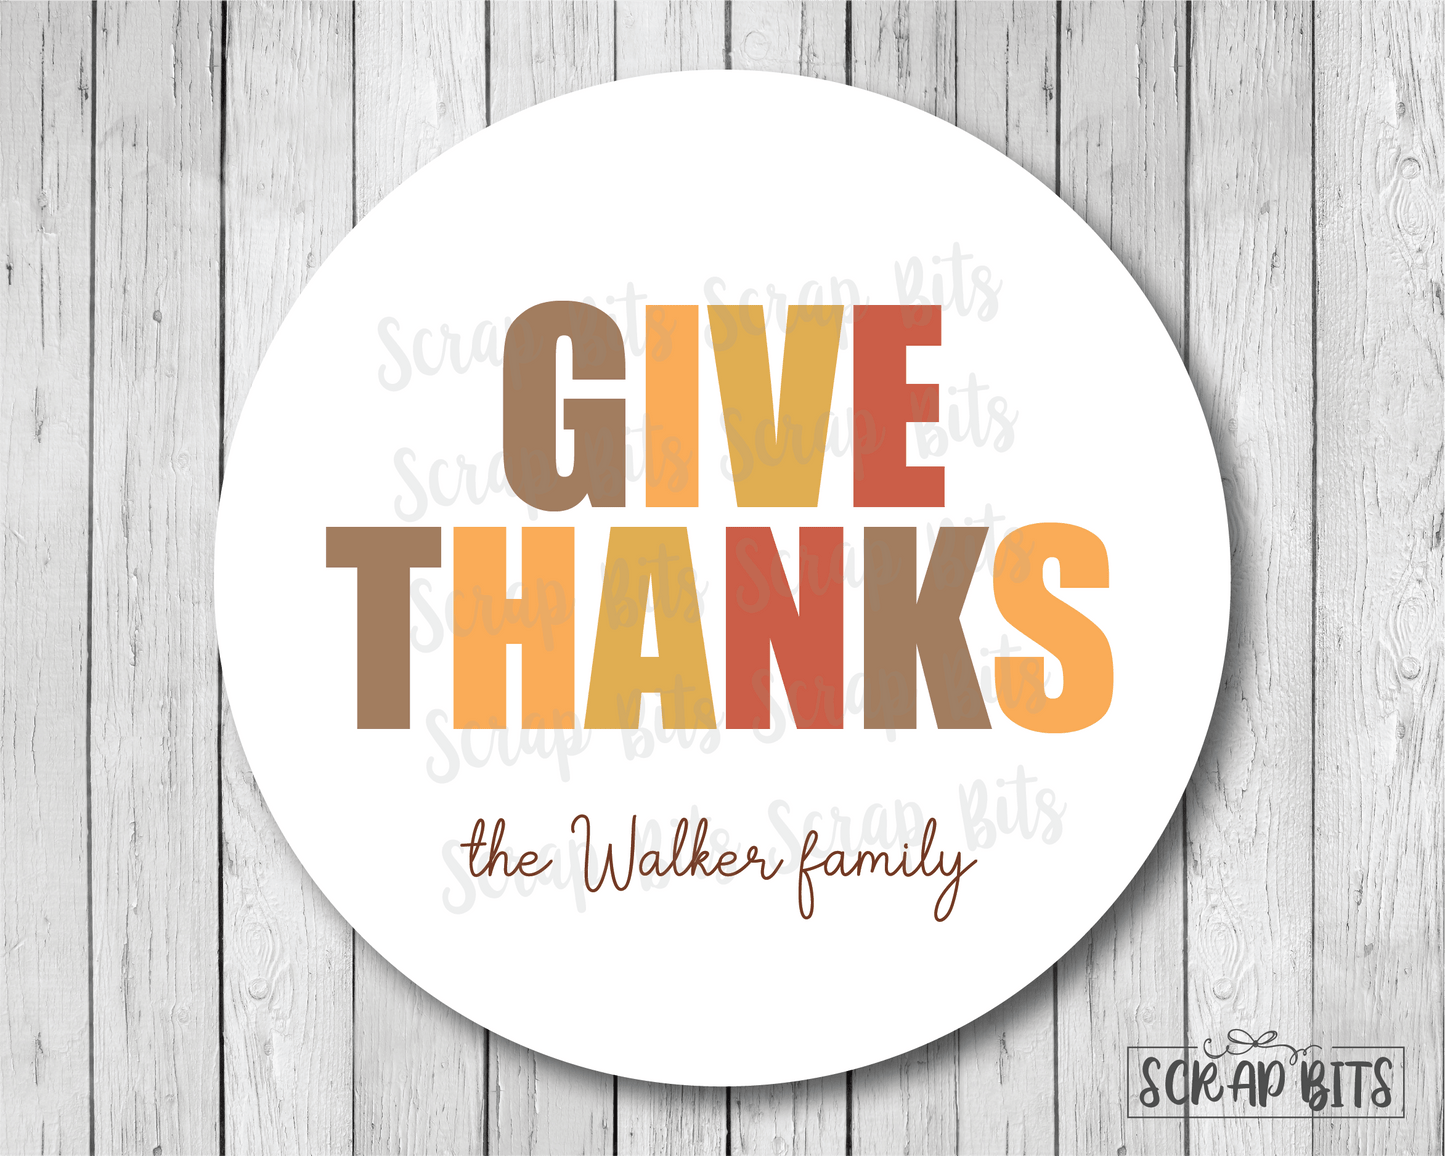 Give Thanks, Bold Lettering . Thanksgiving Stickers or Tags - Scrap Bits